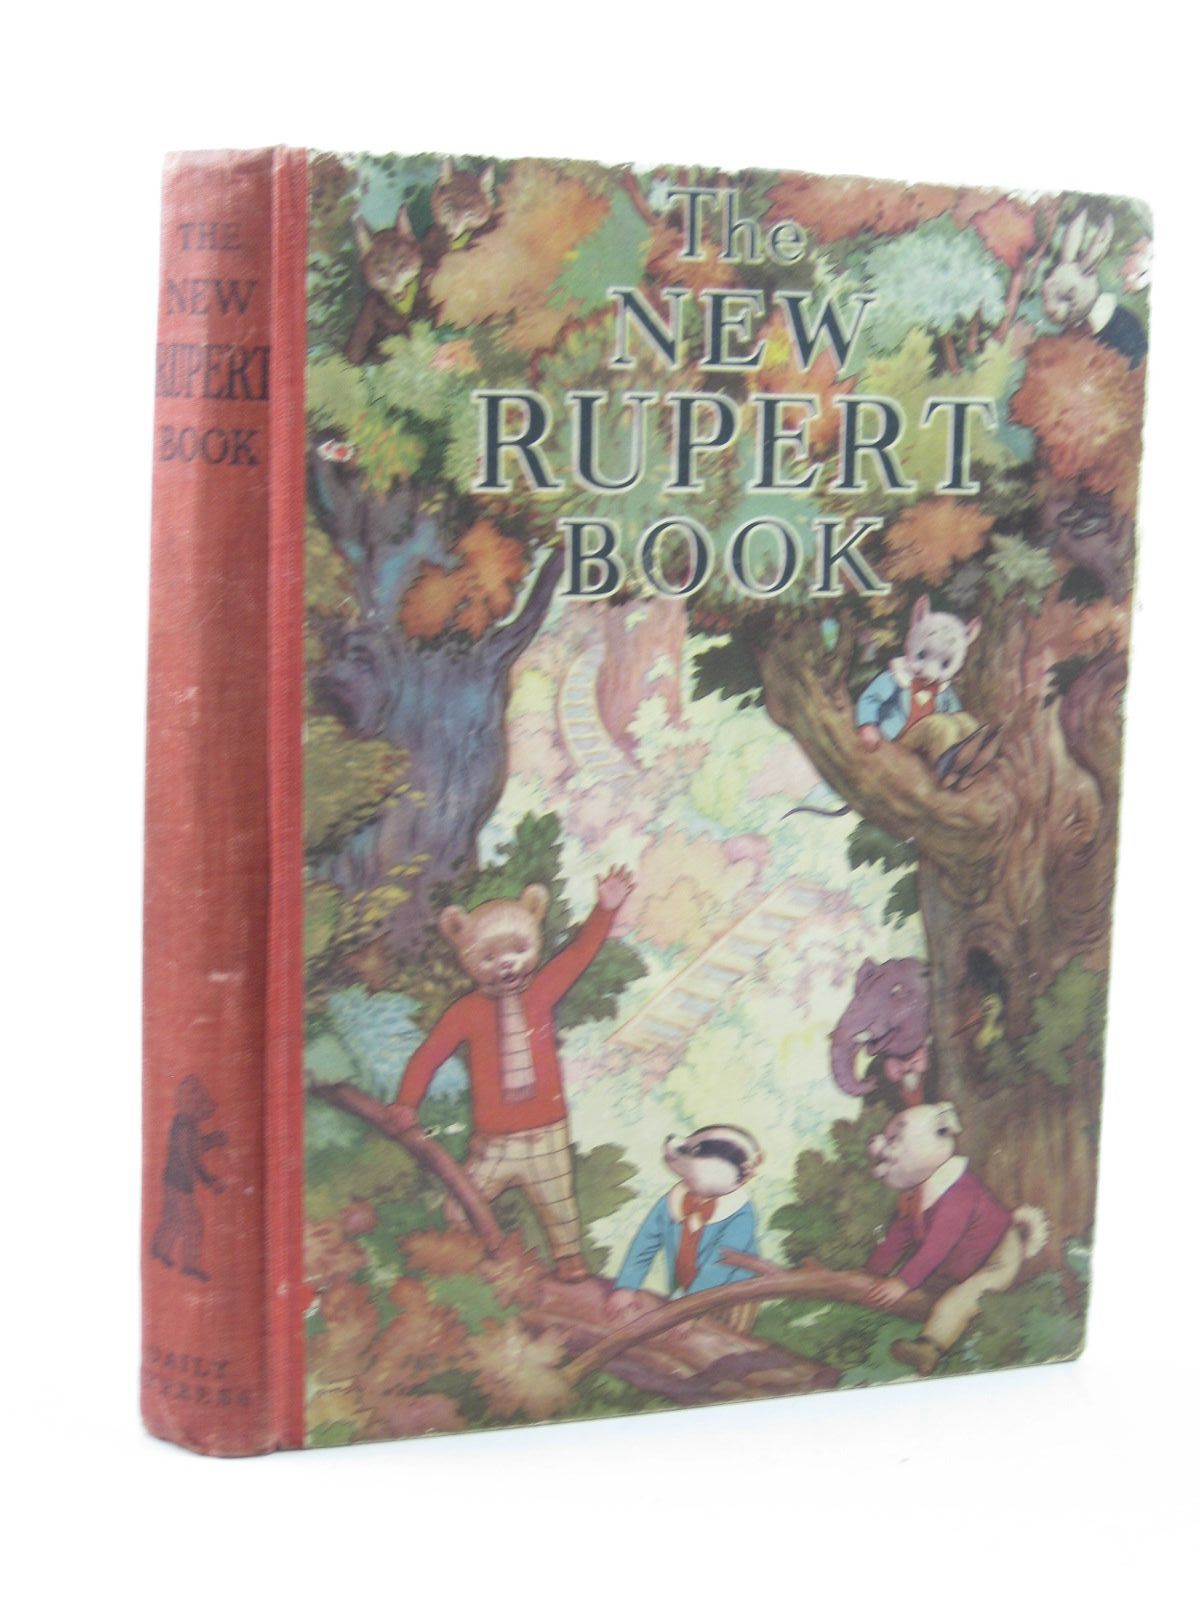 Photo of RUPERT ANNUAL 1938 - THE NEW RUPERT BOOK written by Bestall, Alfred illustrated by Bestall, Alfred published by Daily Express (STOCK CODE: 1313469)  for sale by Stella & Rose's Books